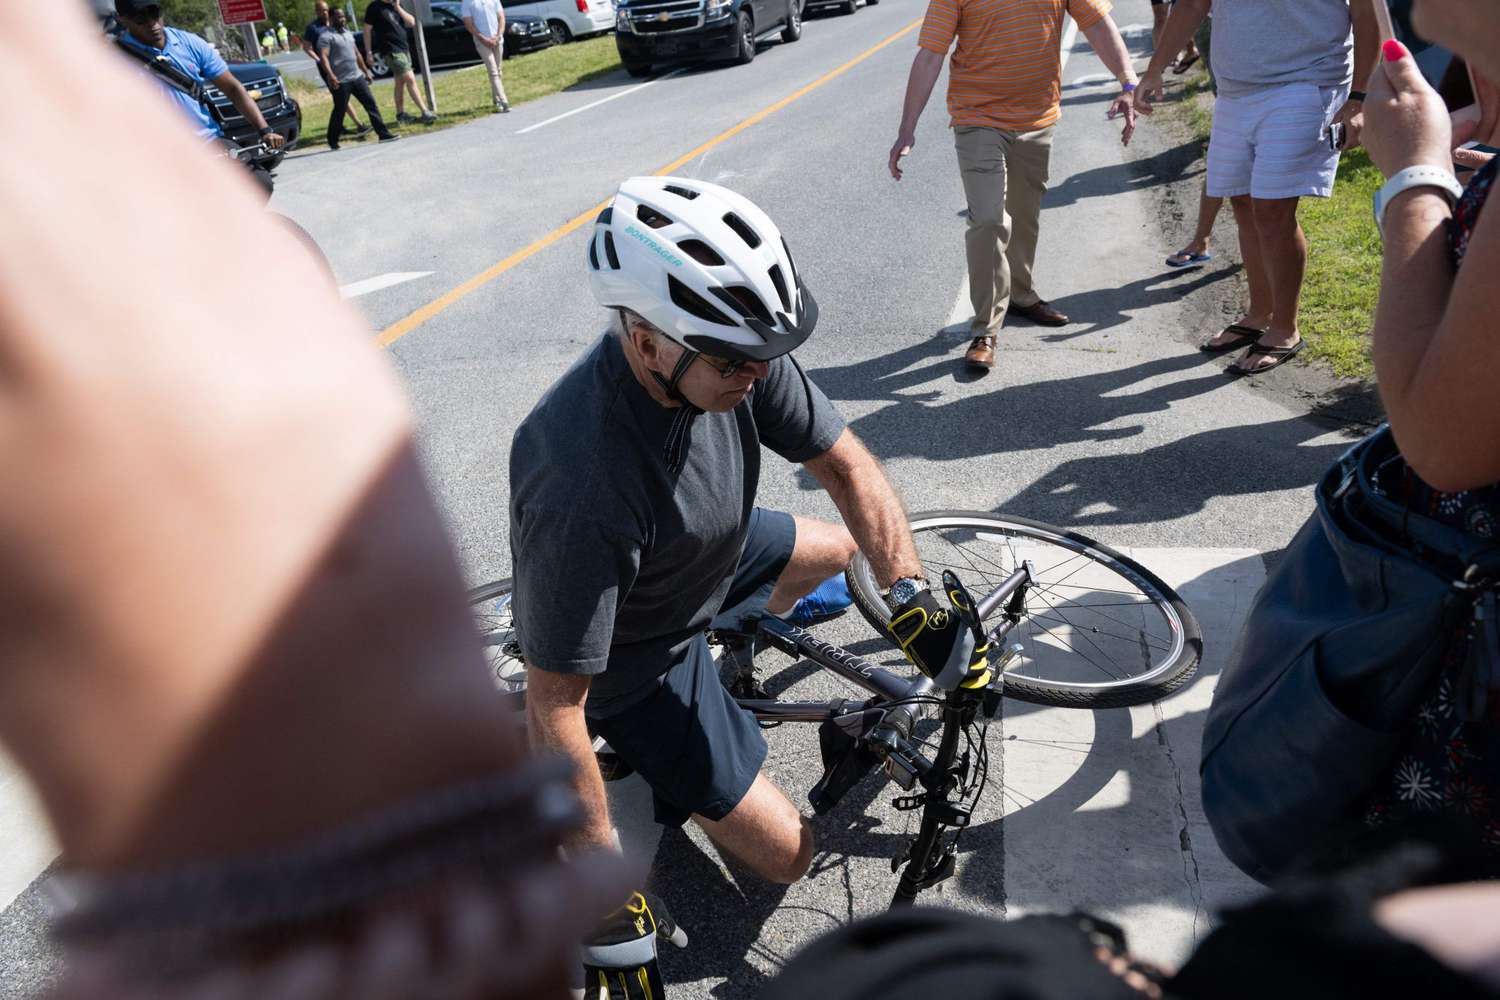 US President Joe Biden falls off his bicycle as he approaches well-wishers following a bike ride at Gordon's Pond State Park in Rehoboth Beach, Delaware, on June 18, 2022. - Biden took a tumble as he was riding his bicycle Saturday morning, but was unhurt. (Photo by SAUL LOEB / AFP) (Photo by SAUL LOEB/AFP via Getty Images)